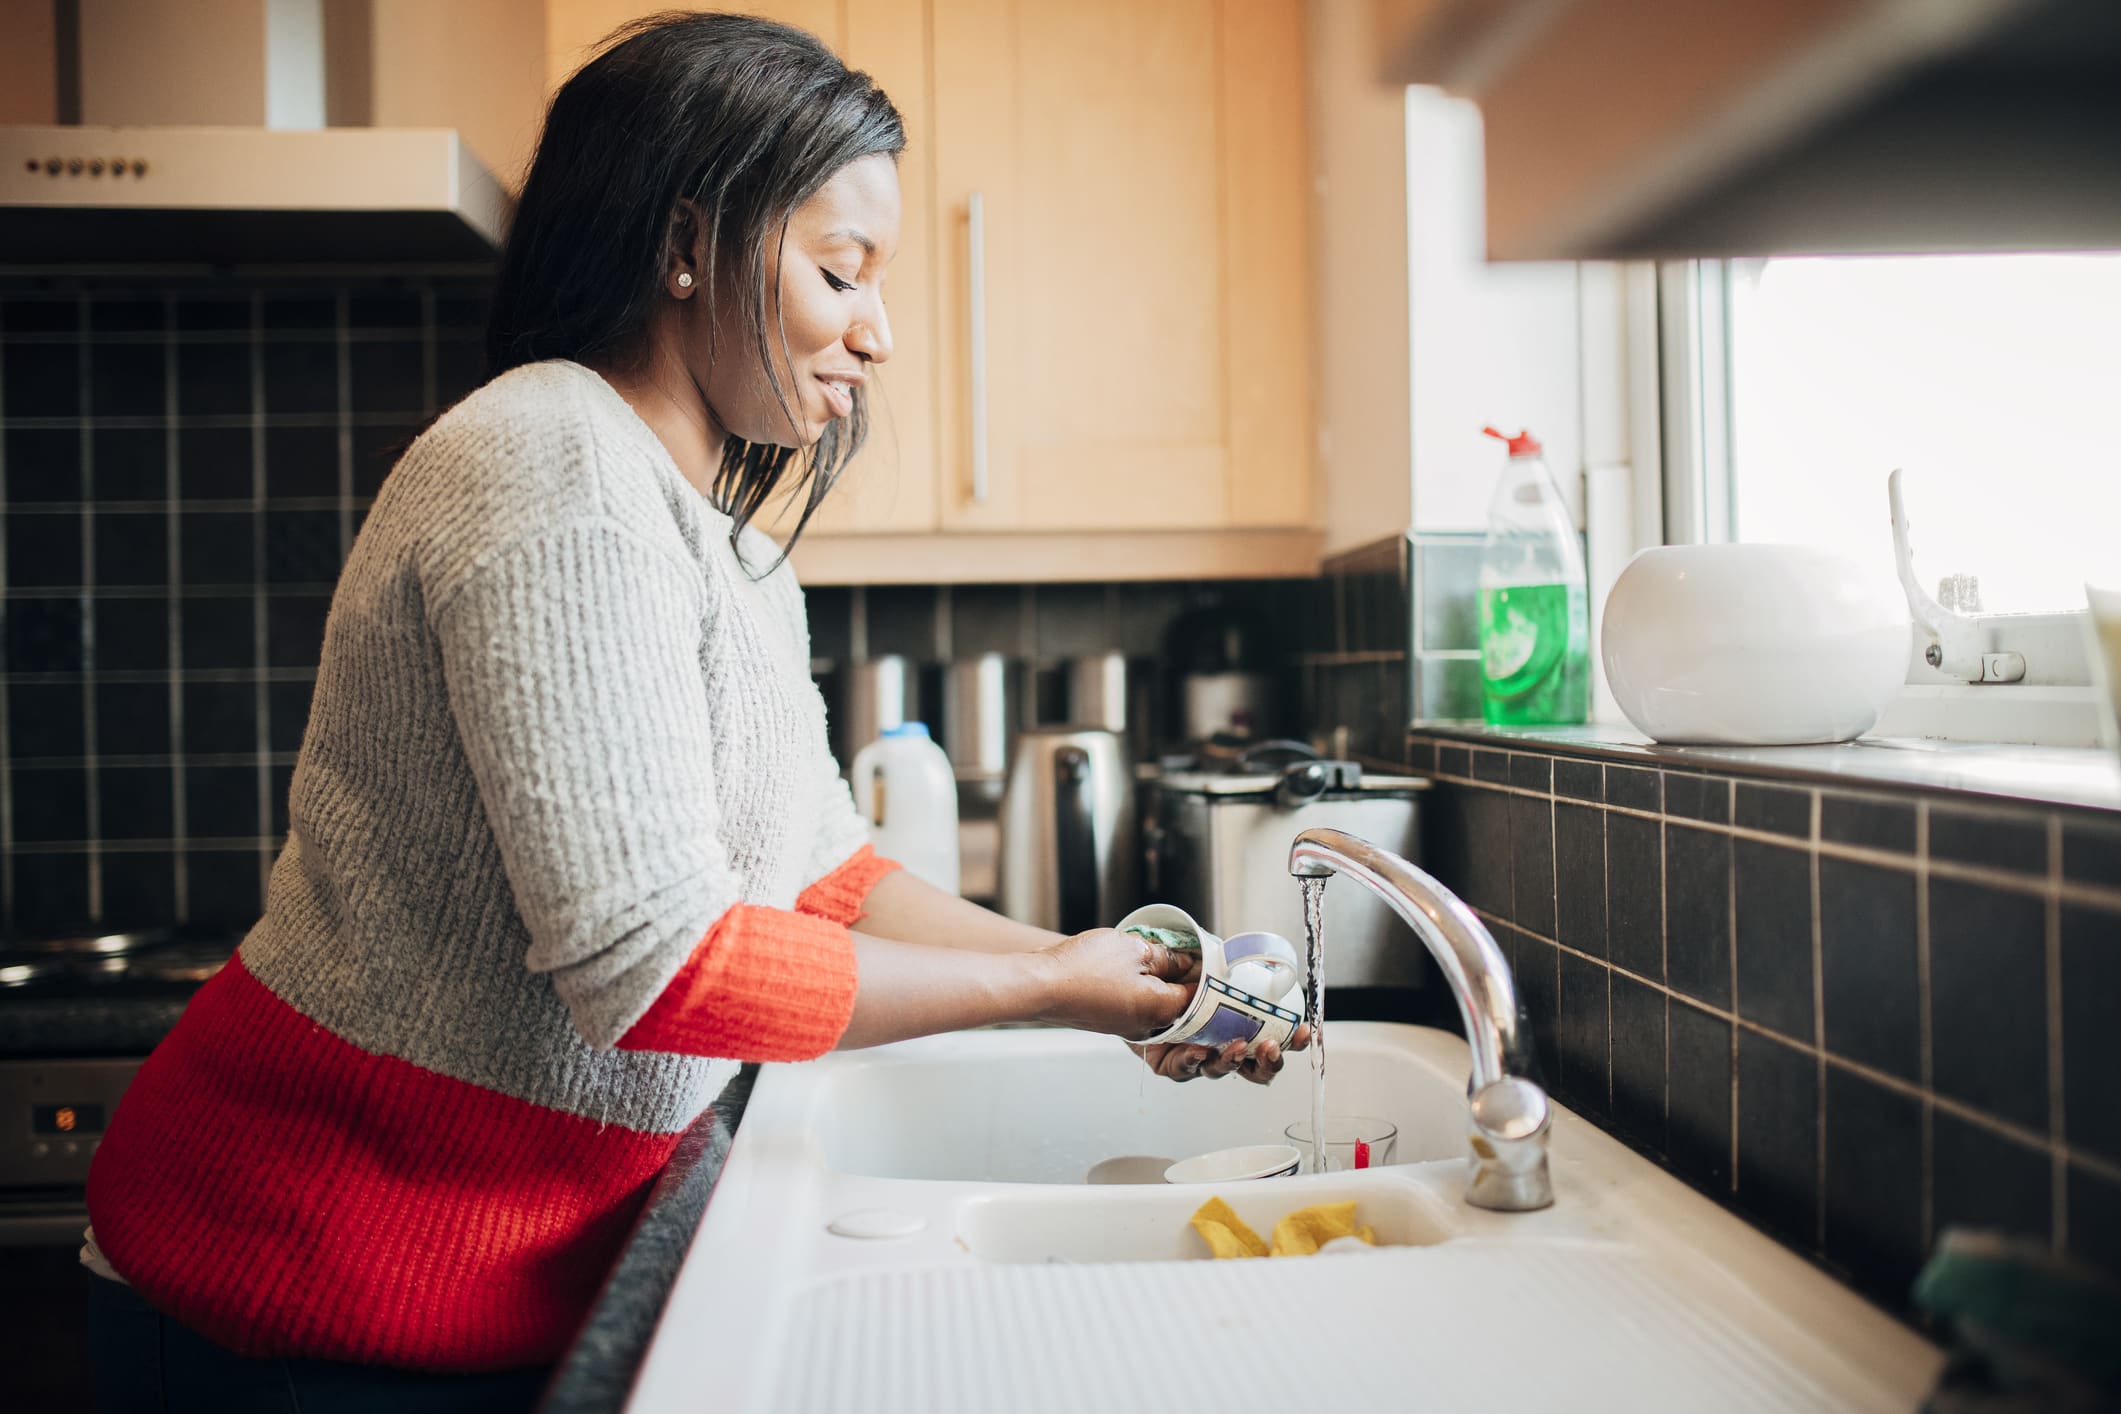 Kitchen Cleaning Tools: Make dishwashing a less painful experience